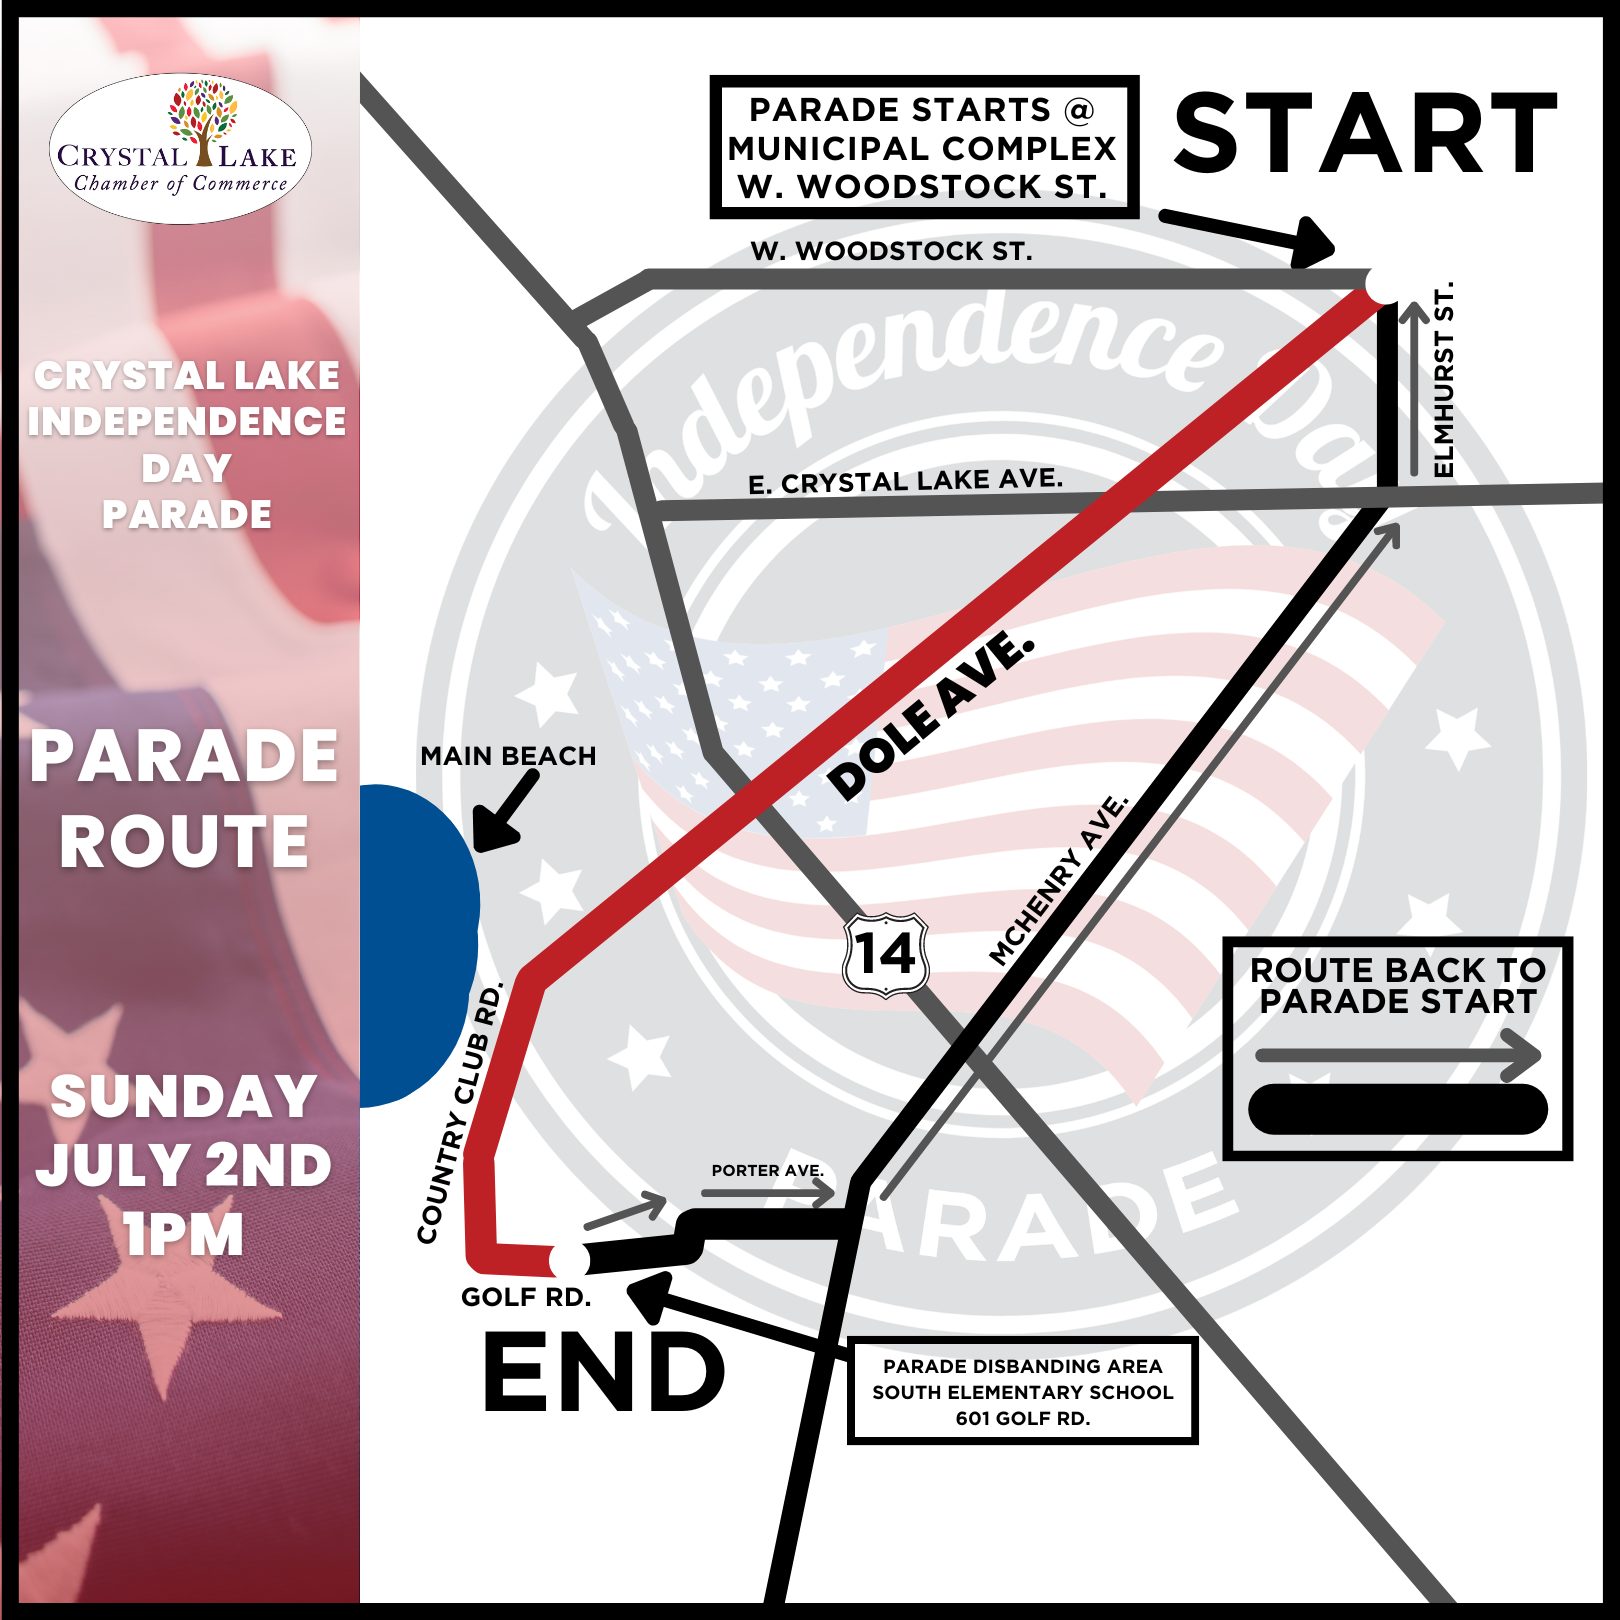 Crystal Lake Independence Day Parade Map Route (4)